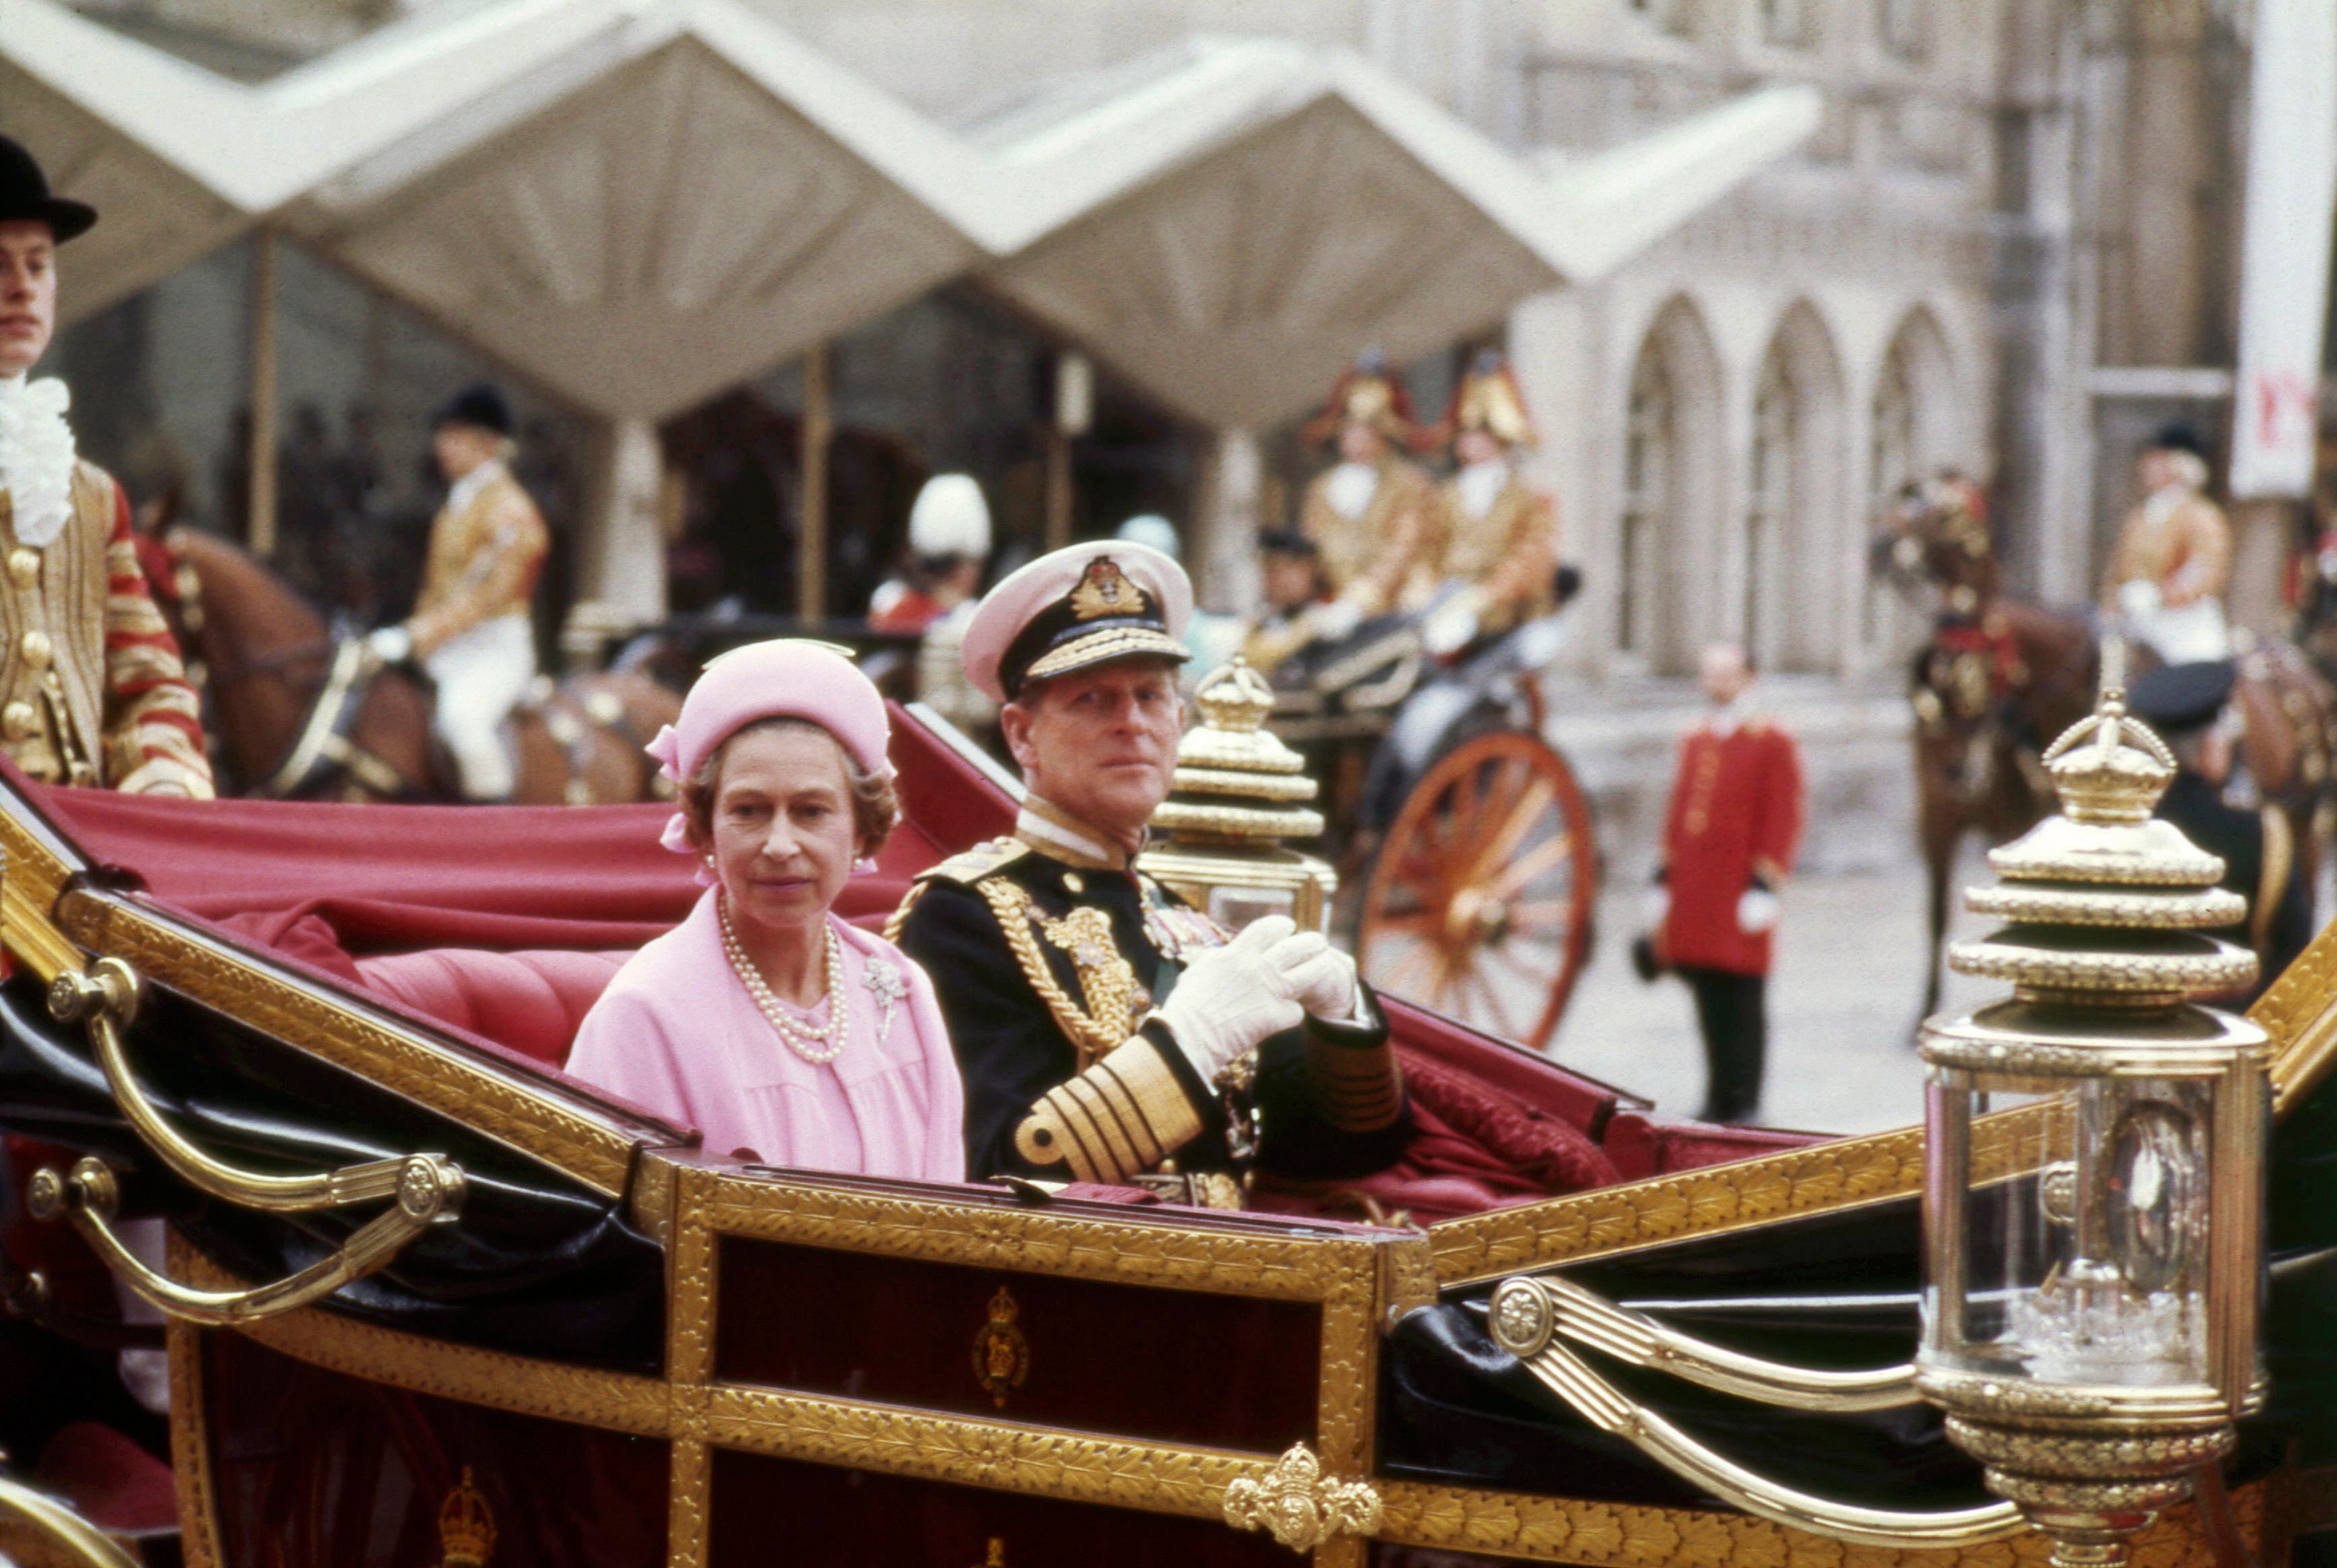 7 June 1977: Queen Elizabeth II and Prince Philip, travel in a carriage during celebrations for the Silver Jubilee in London